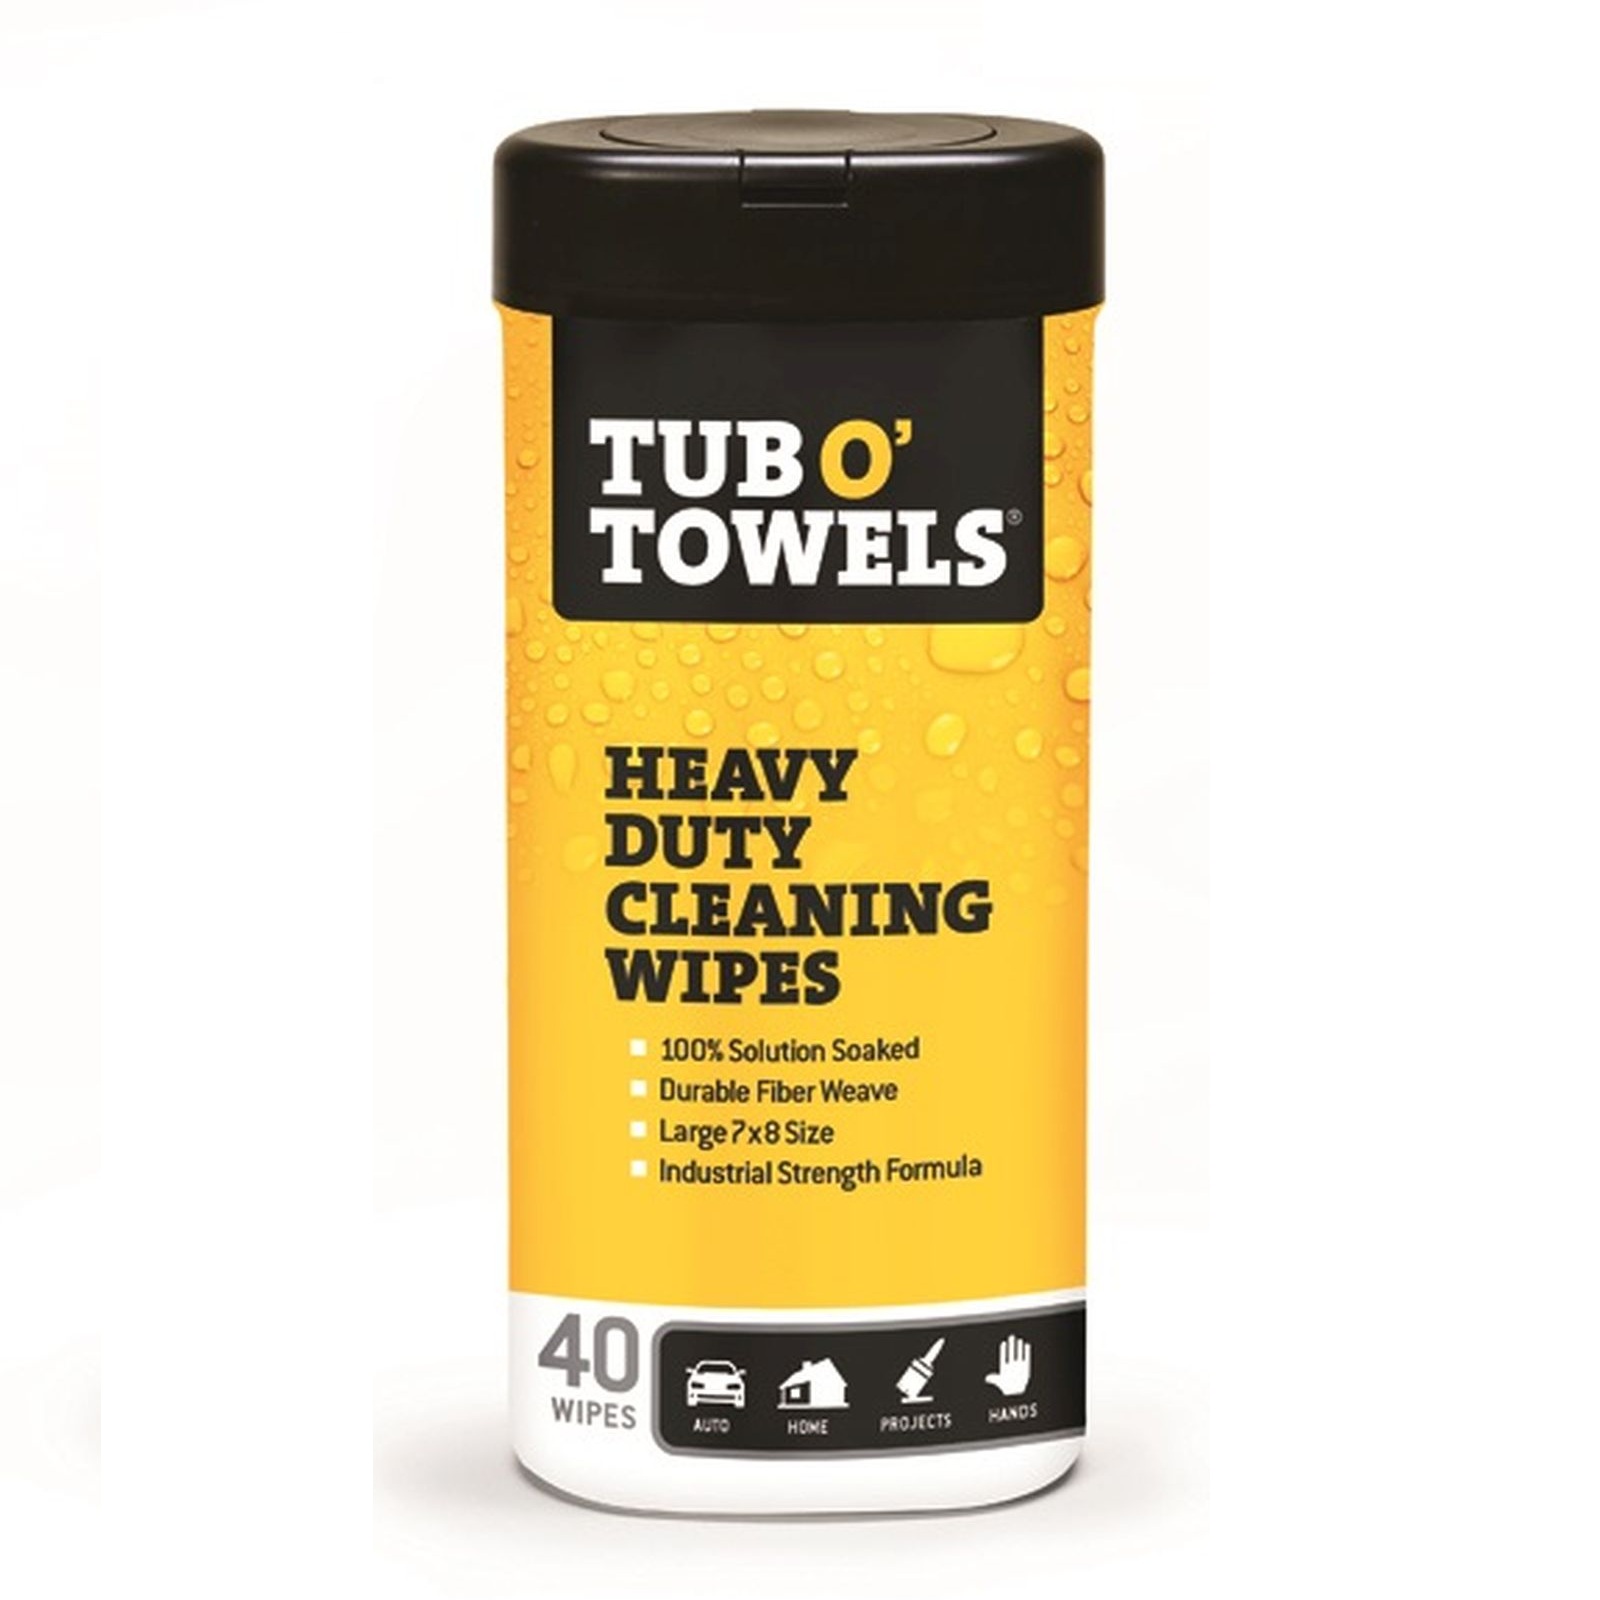 Tub O'Towels Heavy Duty Cleaning Wipes, 40 count wipes